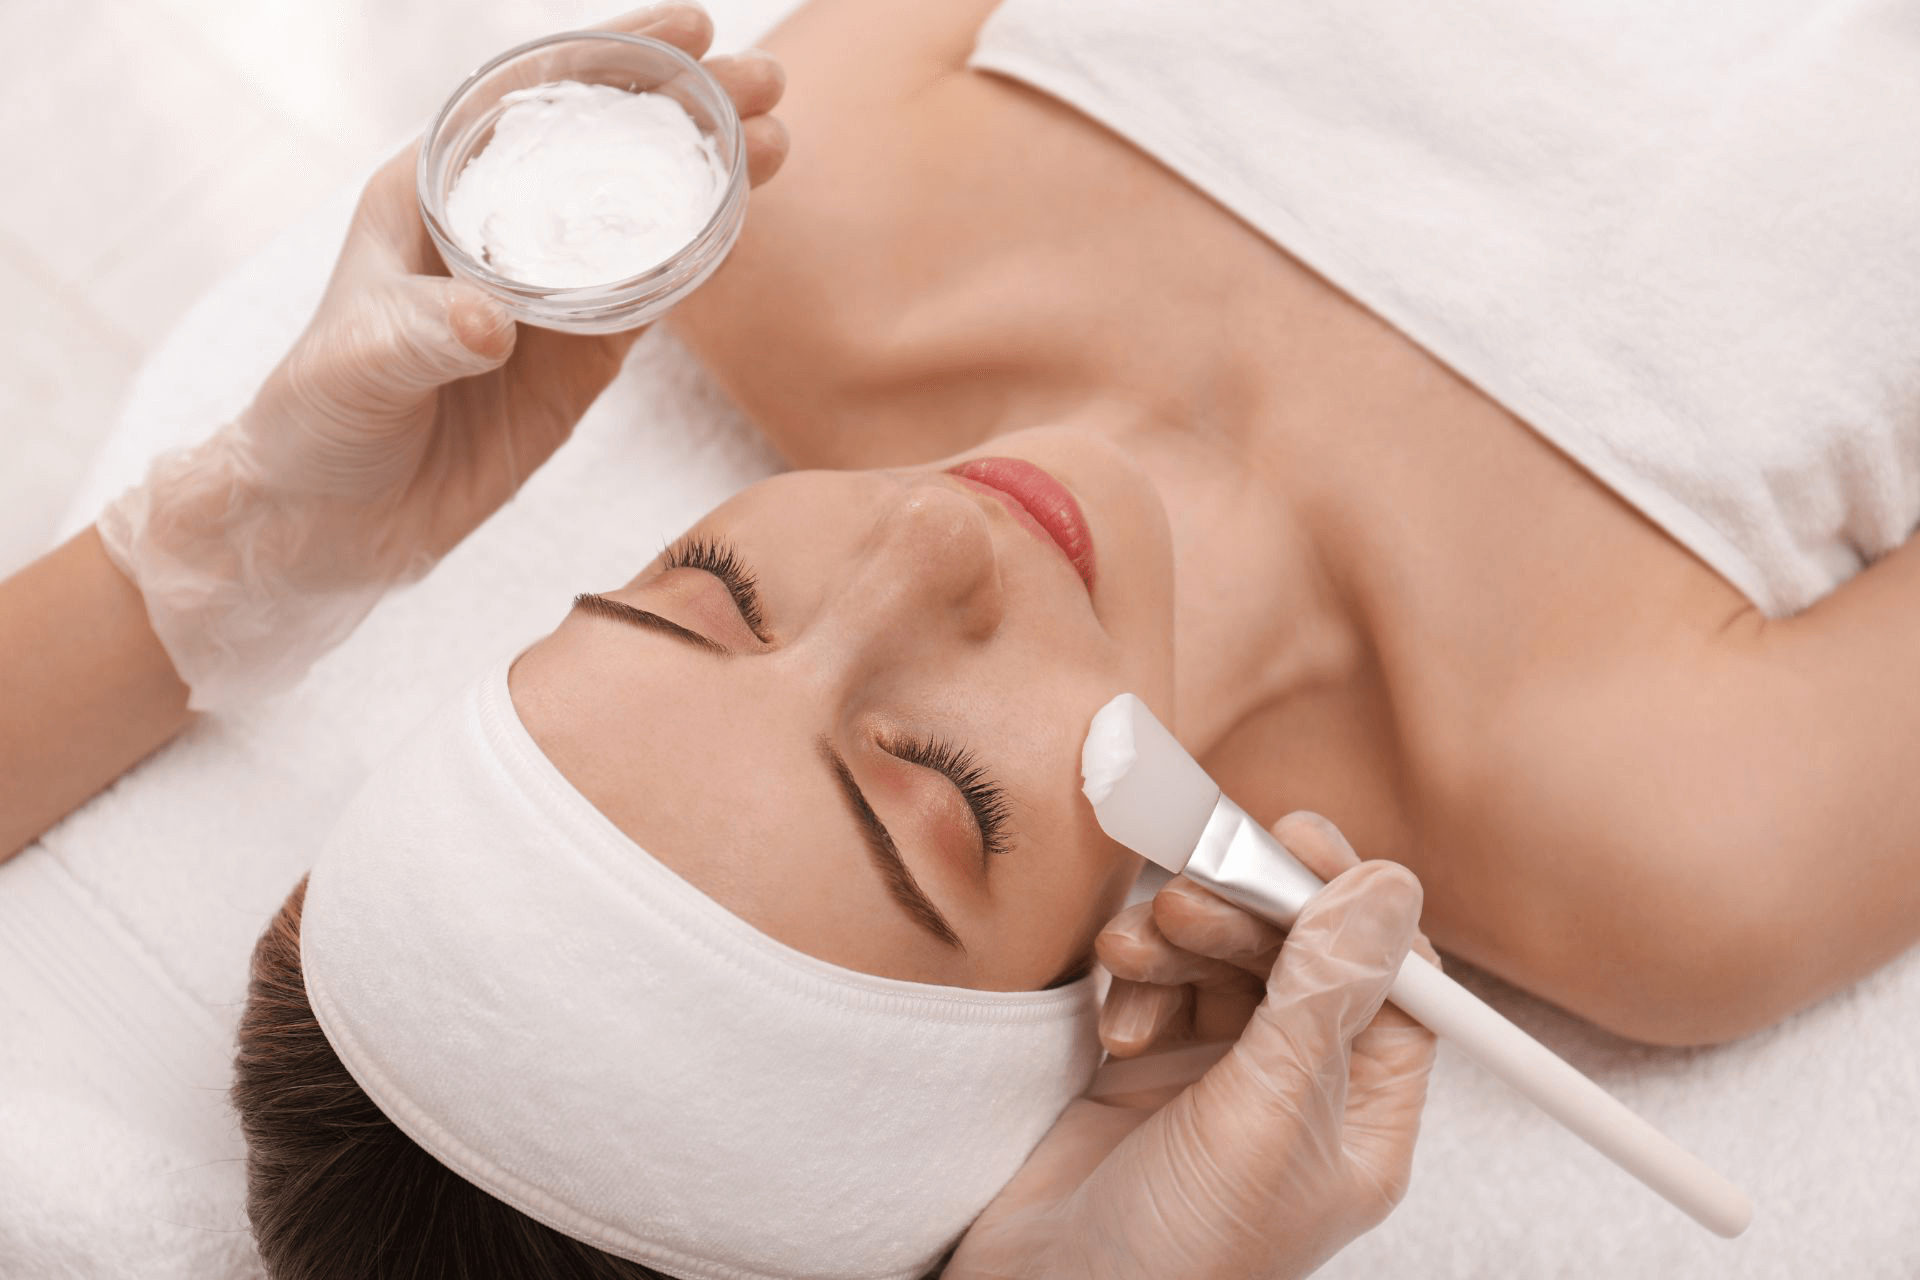 A woman getting a chemical peel applied to her face